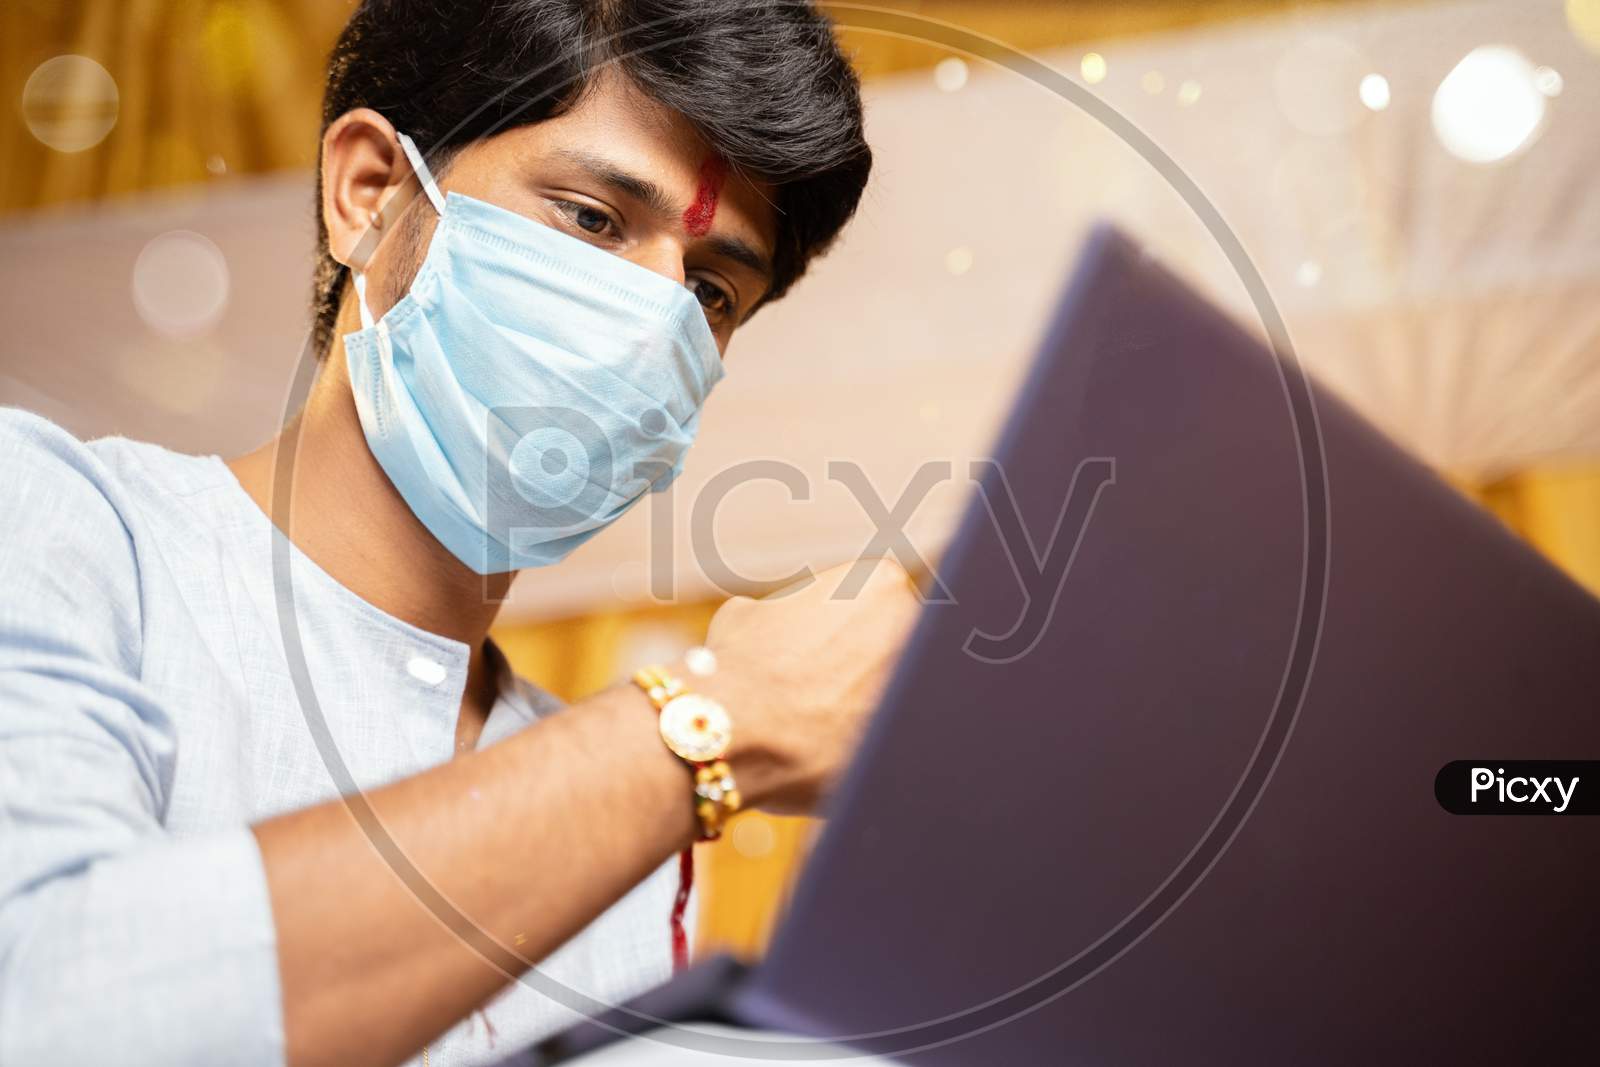 Young Man With Medical Mask Making Video Call And Showing Rakhi Or Raksha Bandhan To His Sister Or Family Friends After Festival Ceremony During Coronavirus Or Covid-19 Pandemic.